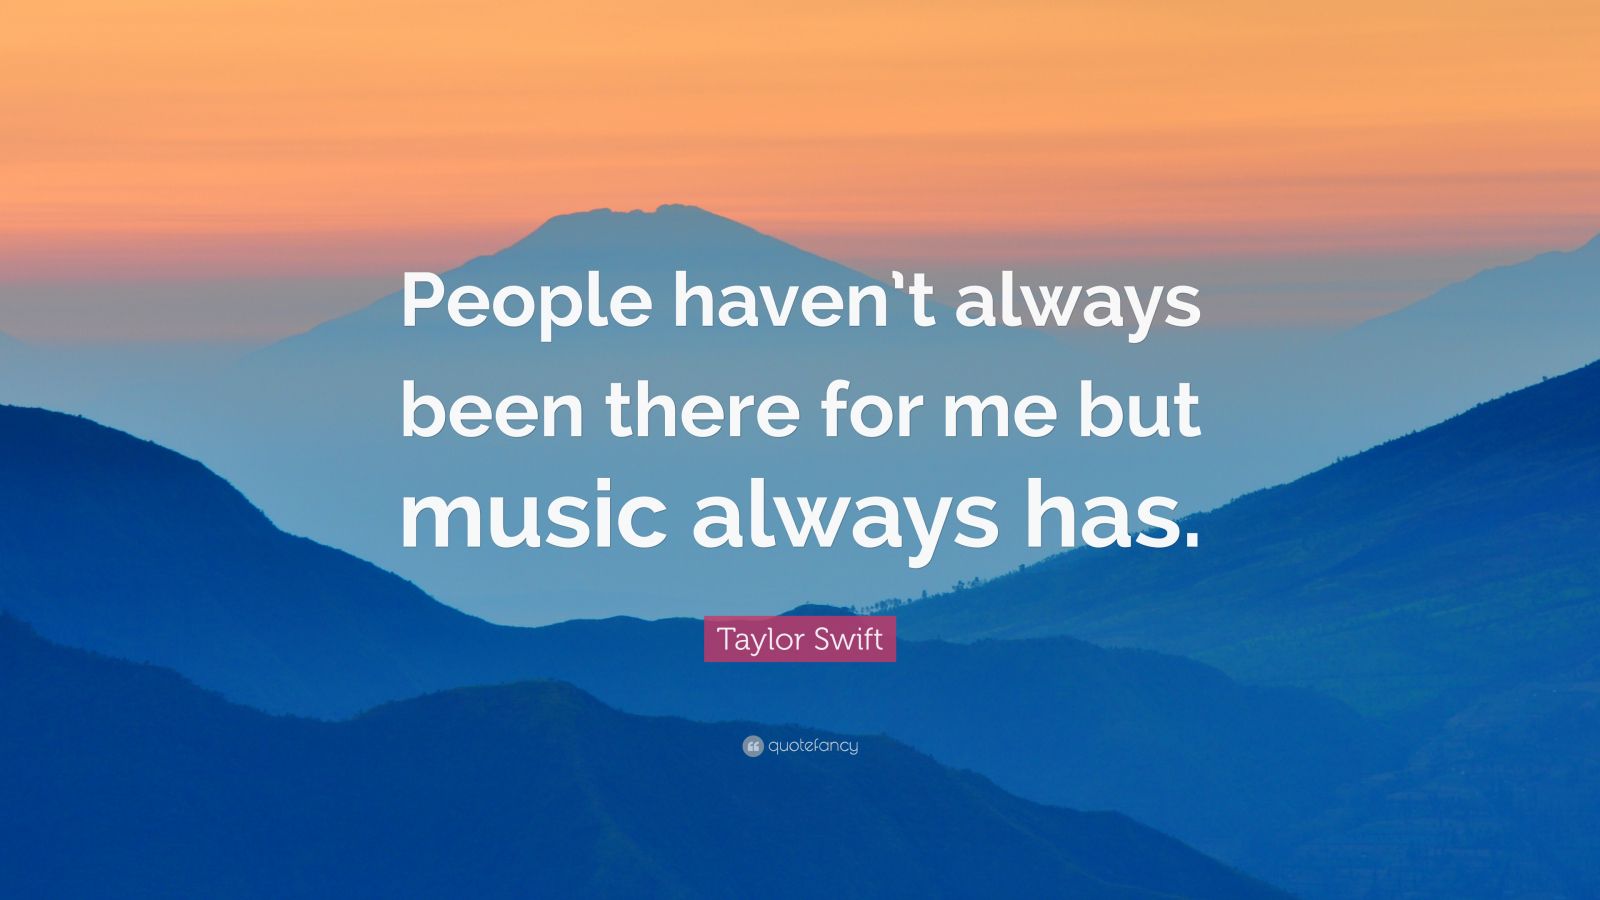 Taylor Swift Quote: “People haven’t always been there for me but music